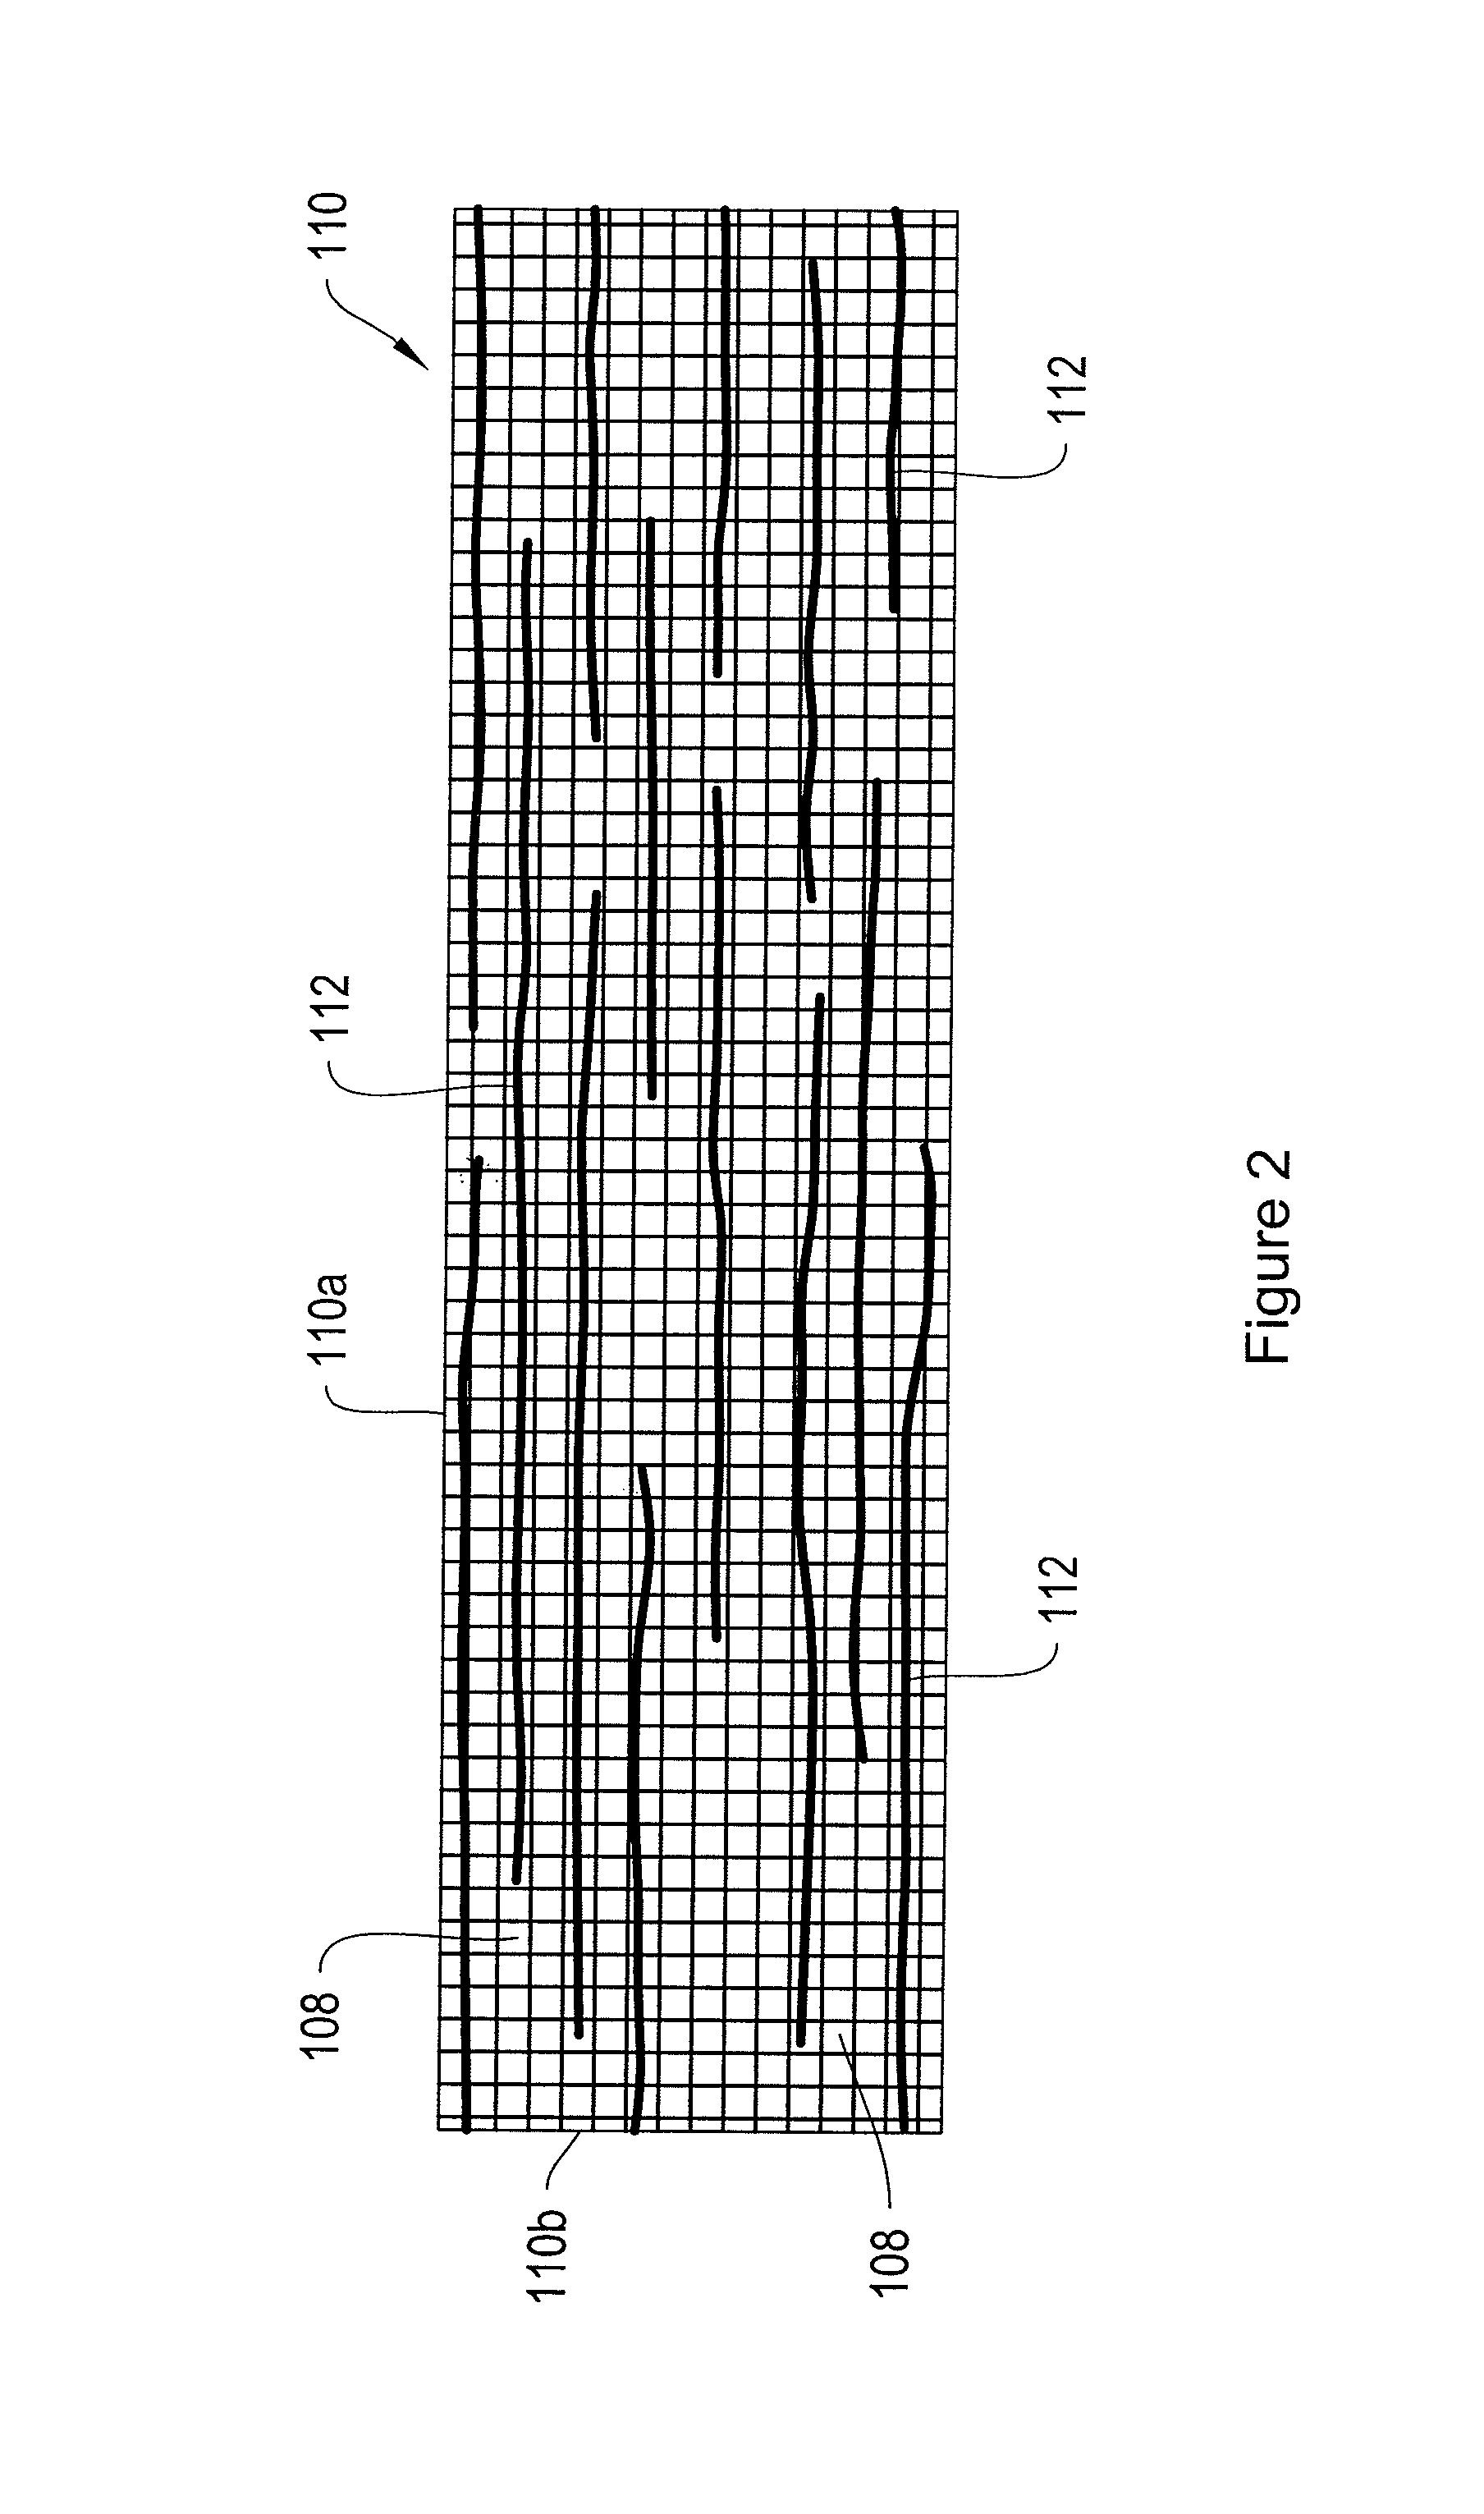 Implantable mesh combining biodegradable and non-biodegradable fibers